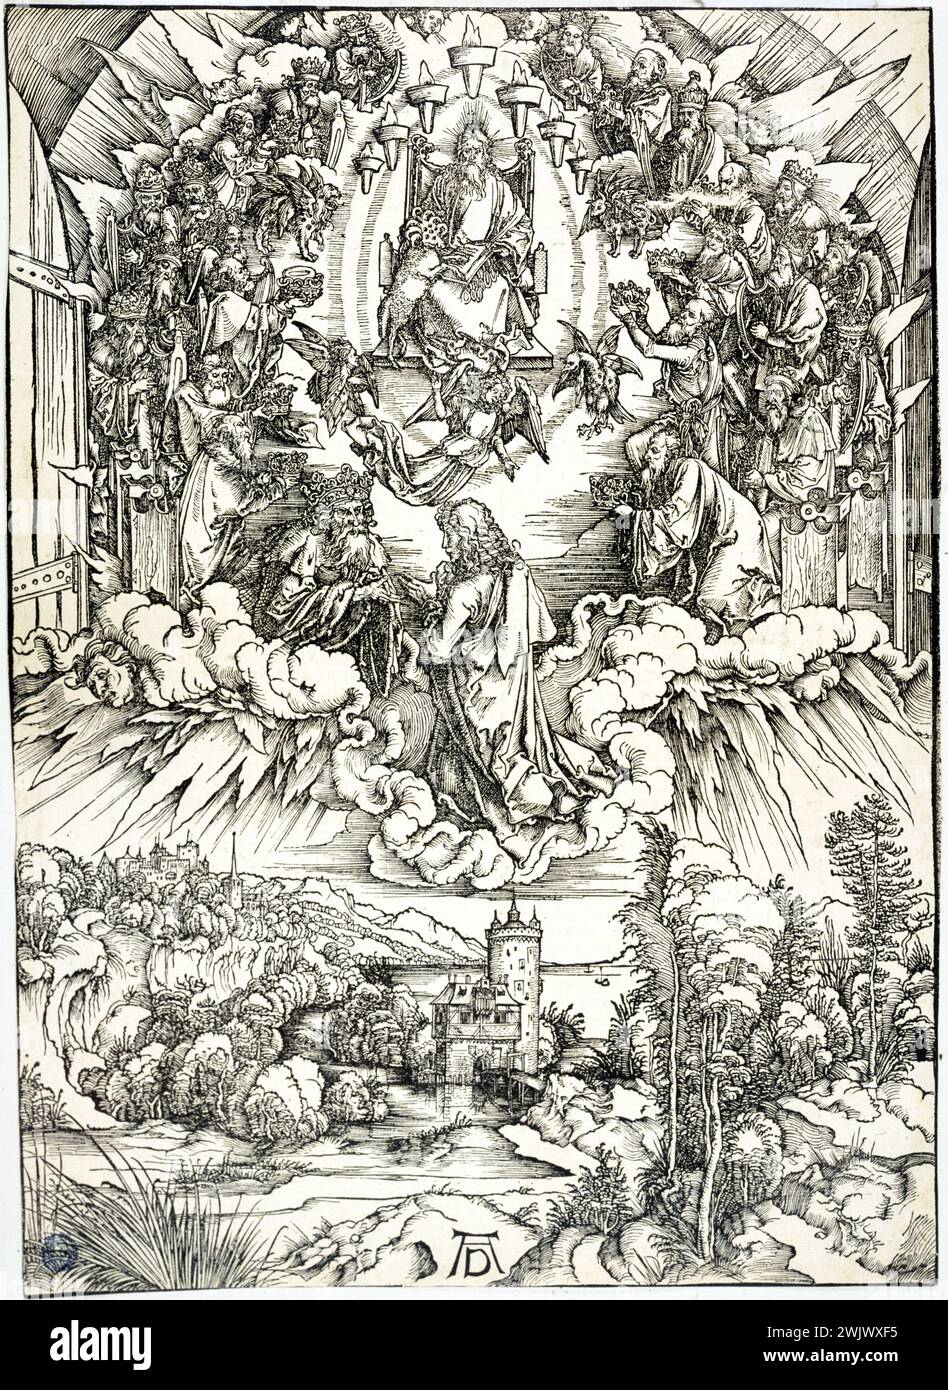 Albrecht Dürer (1471-1528). 'The Apocalypse - Saint John before God and the 24 old people', B 63 - 1st German edition. Engraved wood. Museum of Fine Arts of the City of Paris, Petit Palais. 35442-10 Apocalypse, apotre, bible, serious wood, Catholic, Christian, God, end of the world, biblical scene, saint, old man, engraving Stock Photo